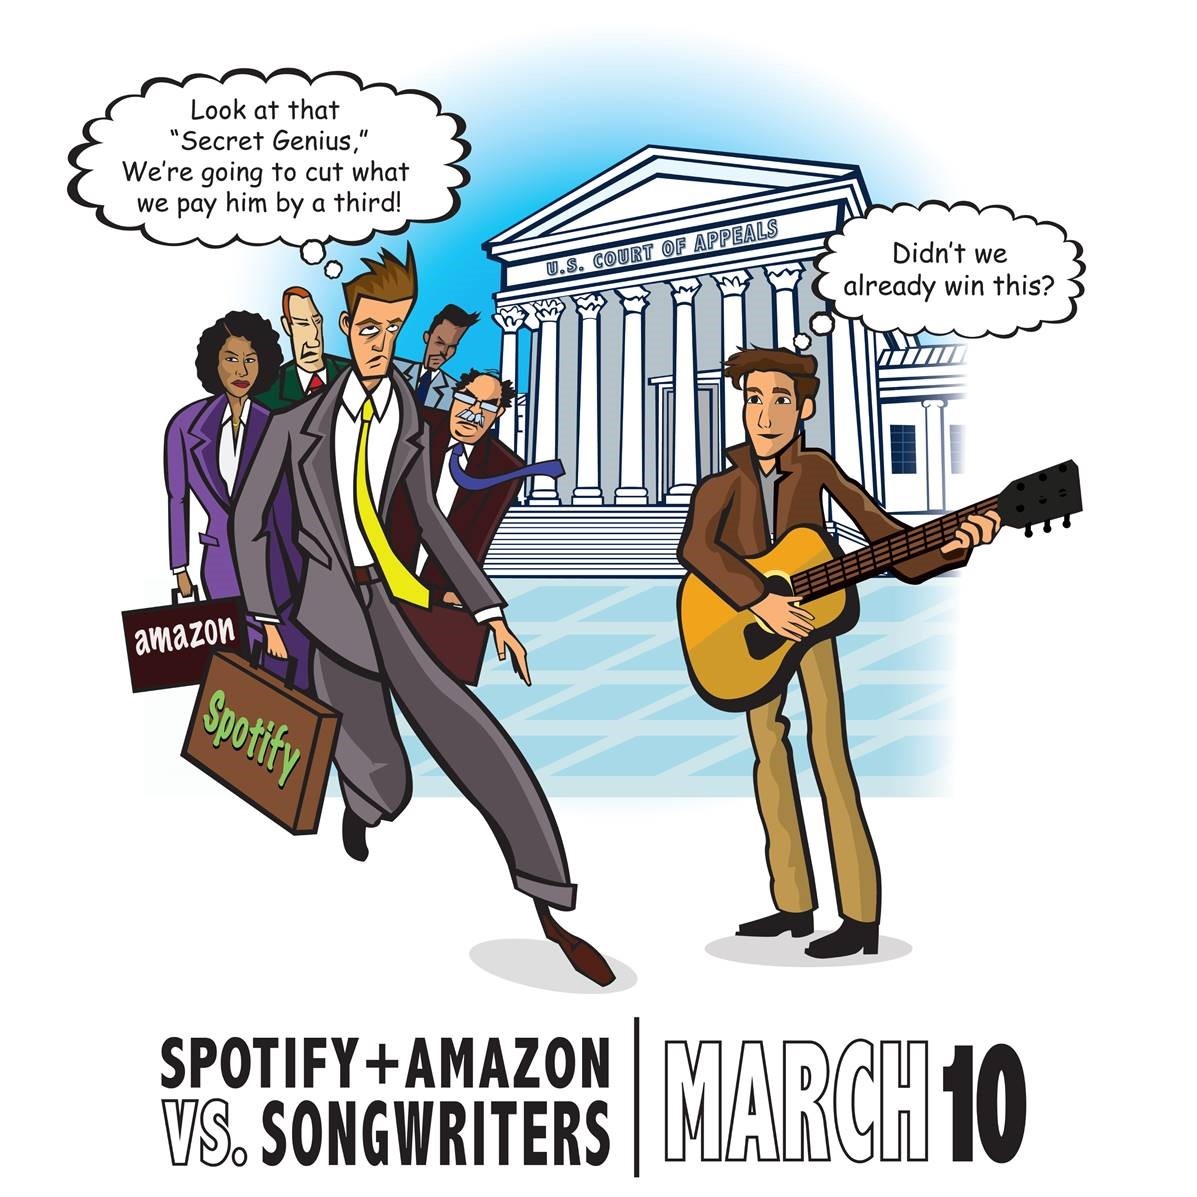 Songwriters: Spotify and Amazon are taking you to court on March 10. They are appealing your 44% raise. Tell @Spotify and @AmazonMusic to #StopFightingSongwriters